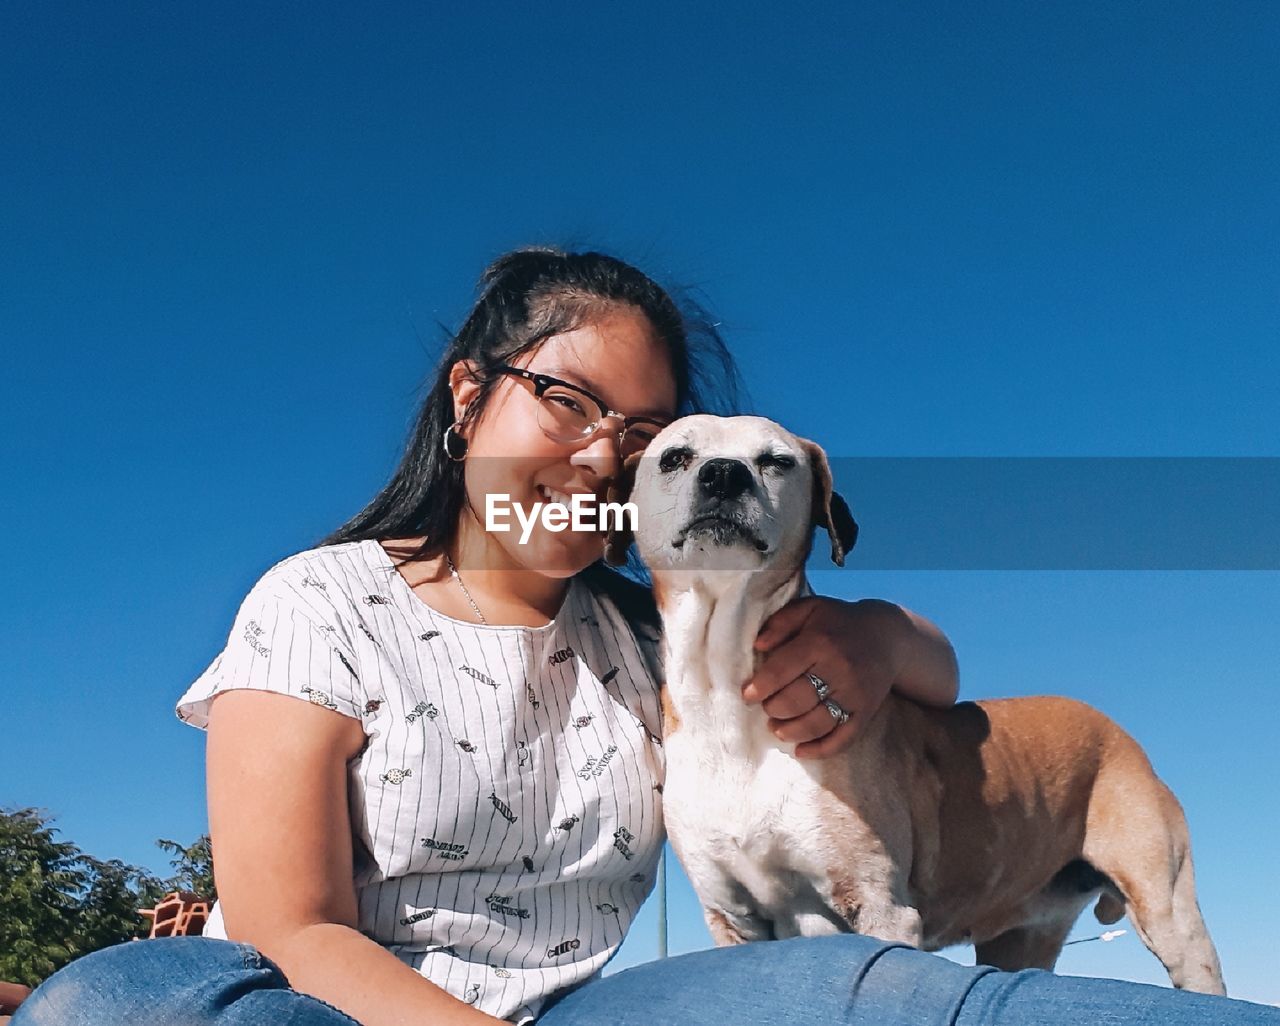 Portrait of smiling young woman with dog sitting against blue sky during sunny day